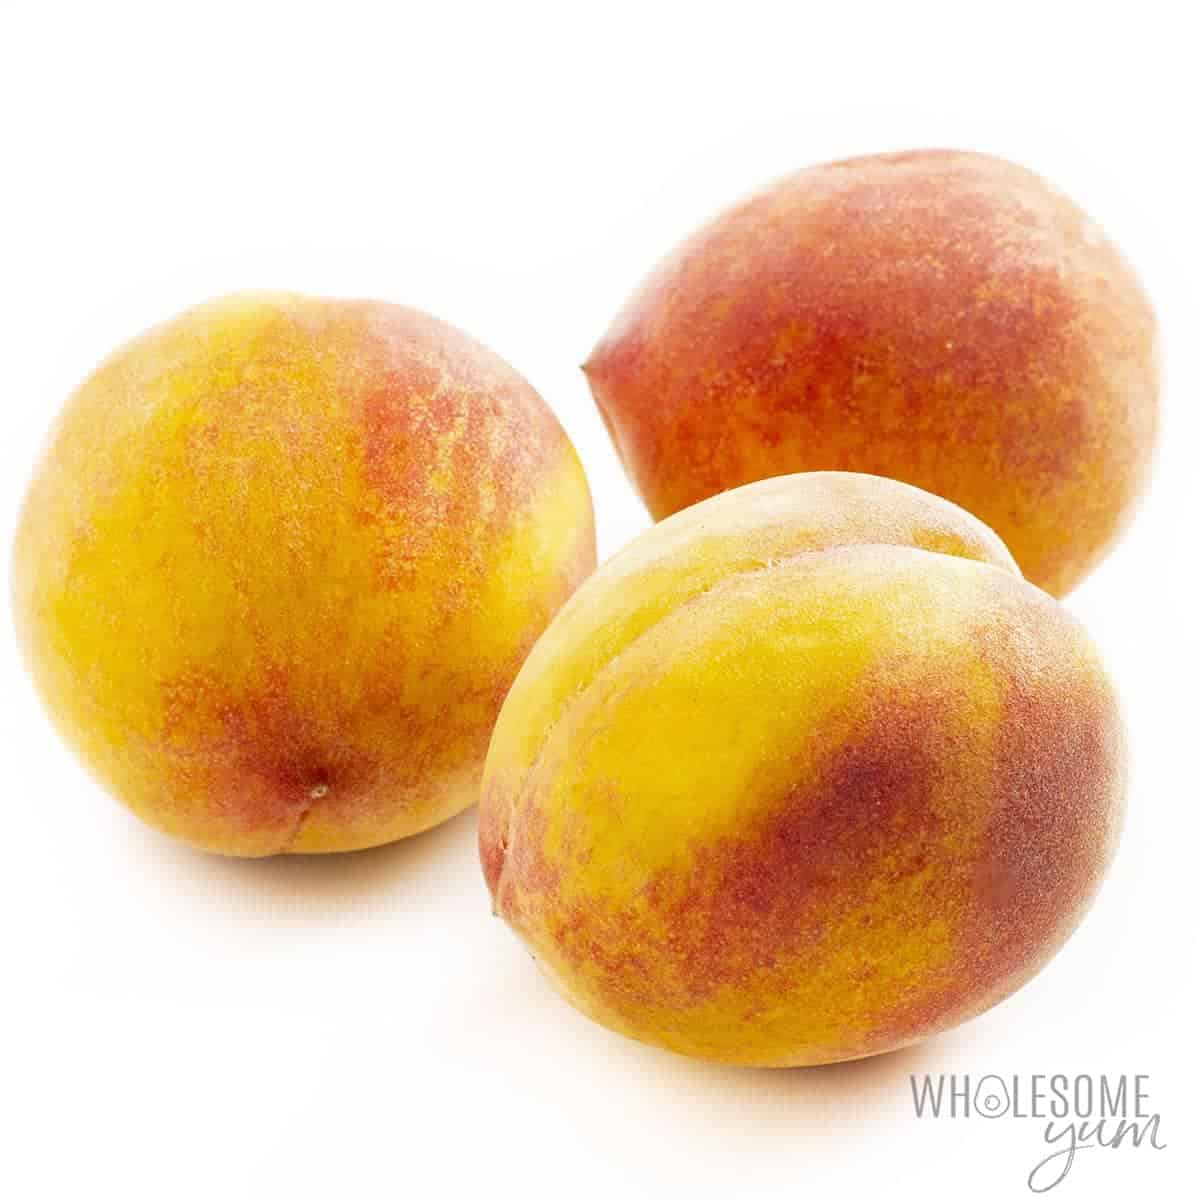 Are peaches keto? And how many carbs in peaches? These fresh peaches have too many carbs to be keto friendly.